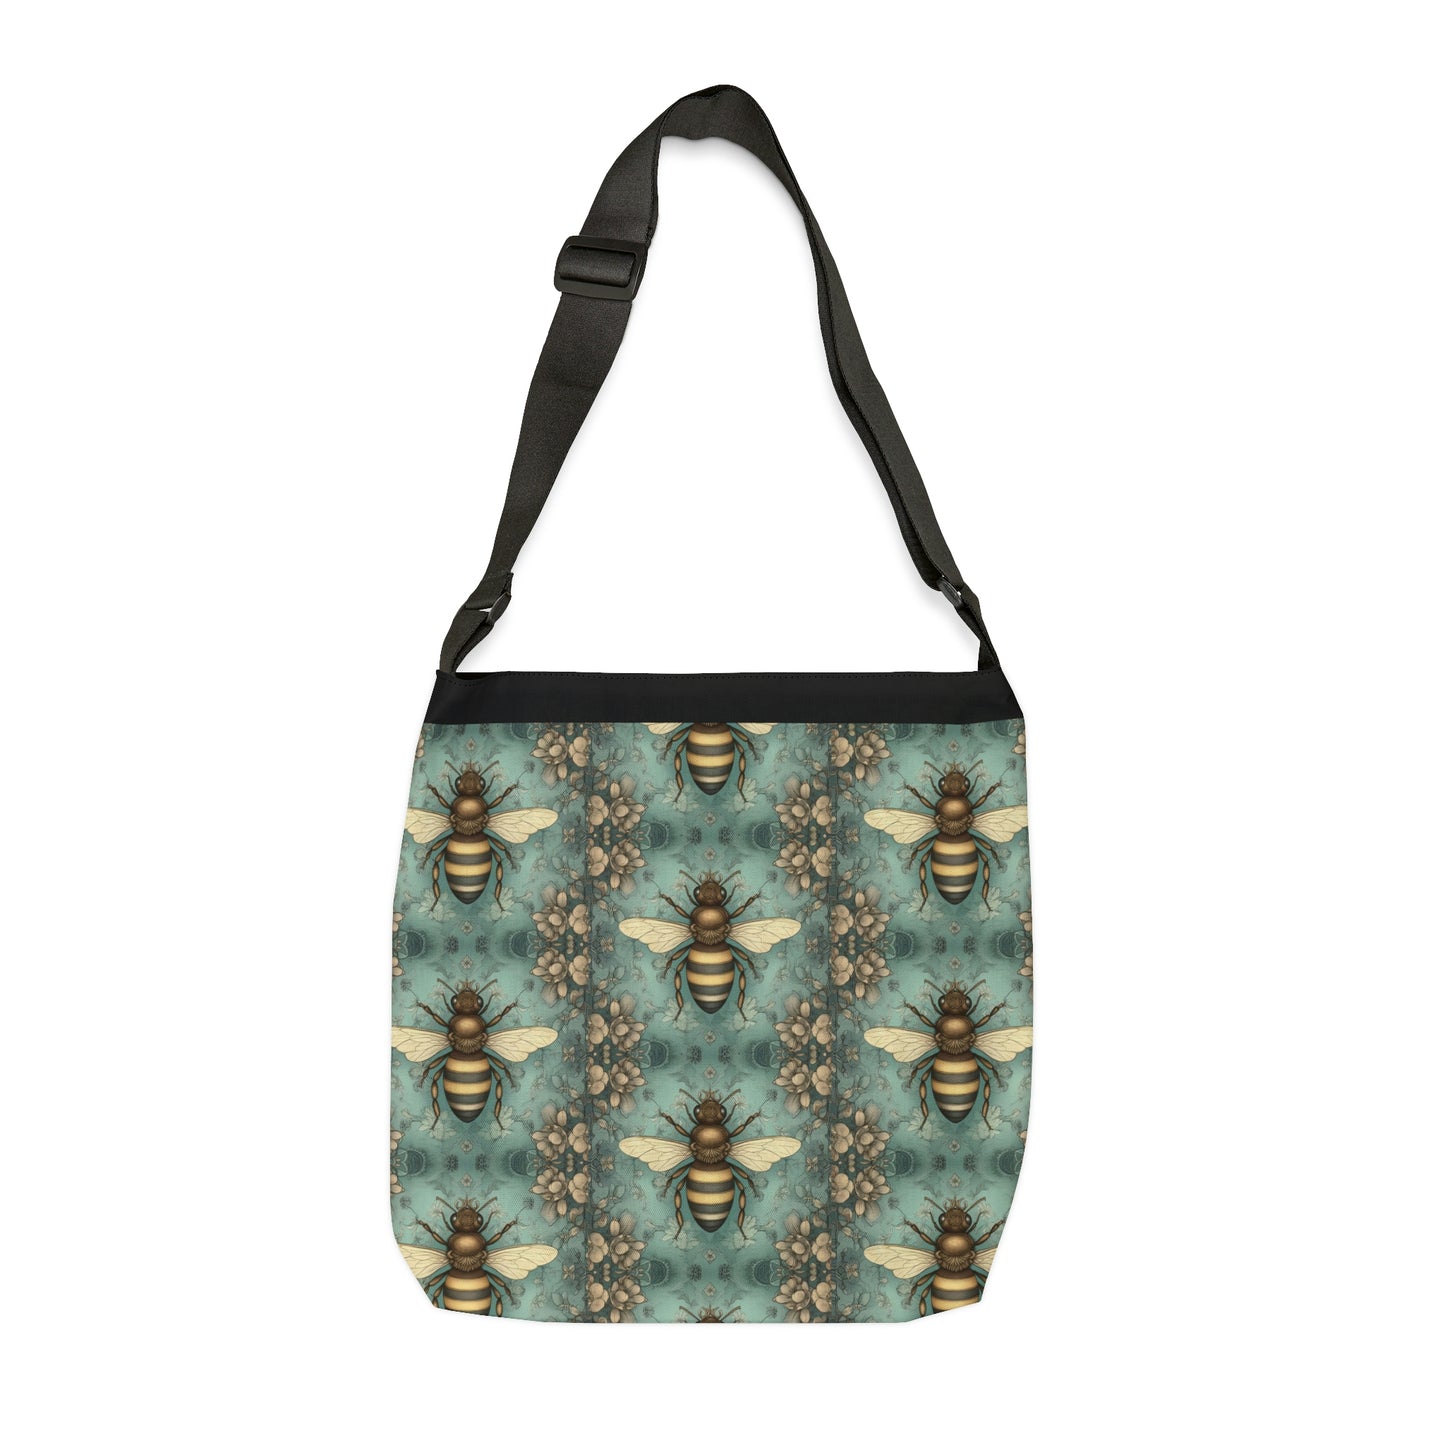 green teal antique honey bee tote bag or crossbody purse for women